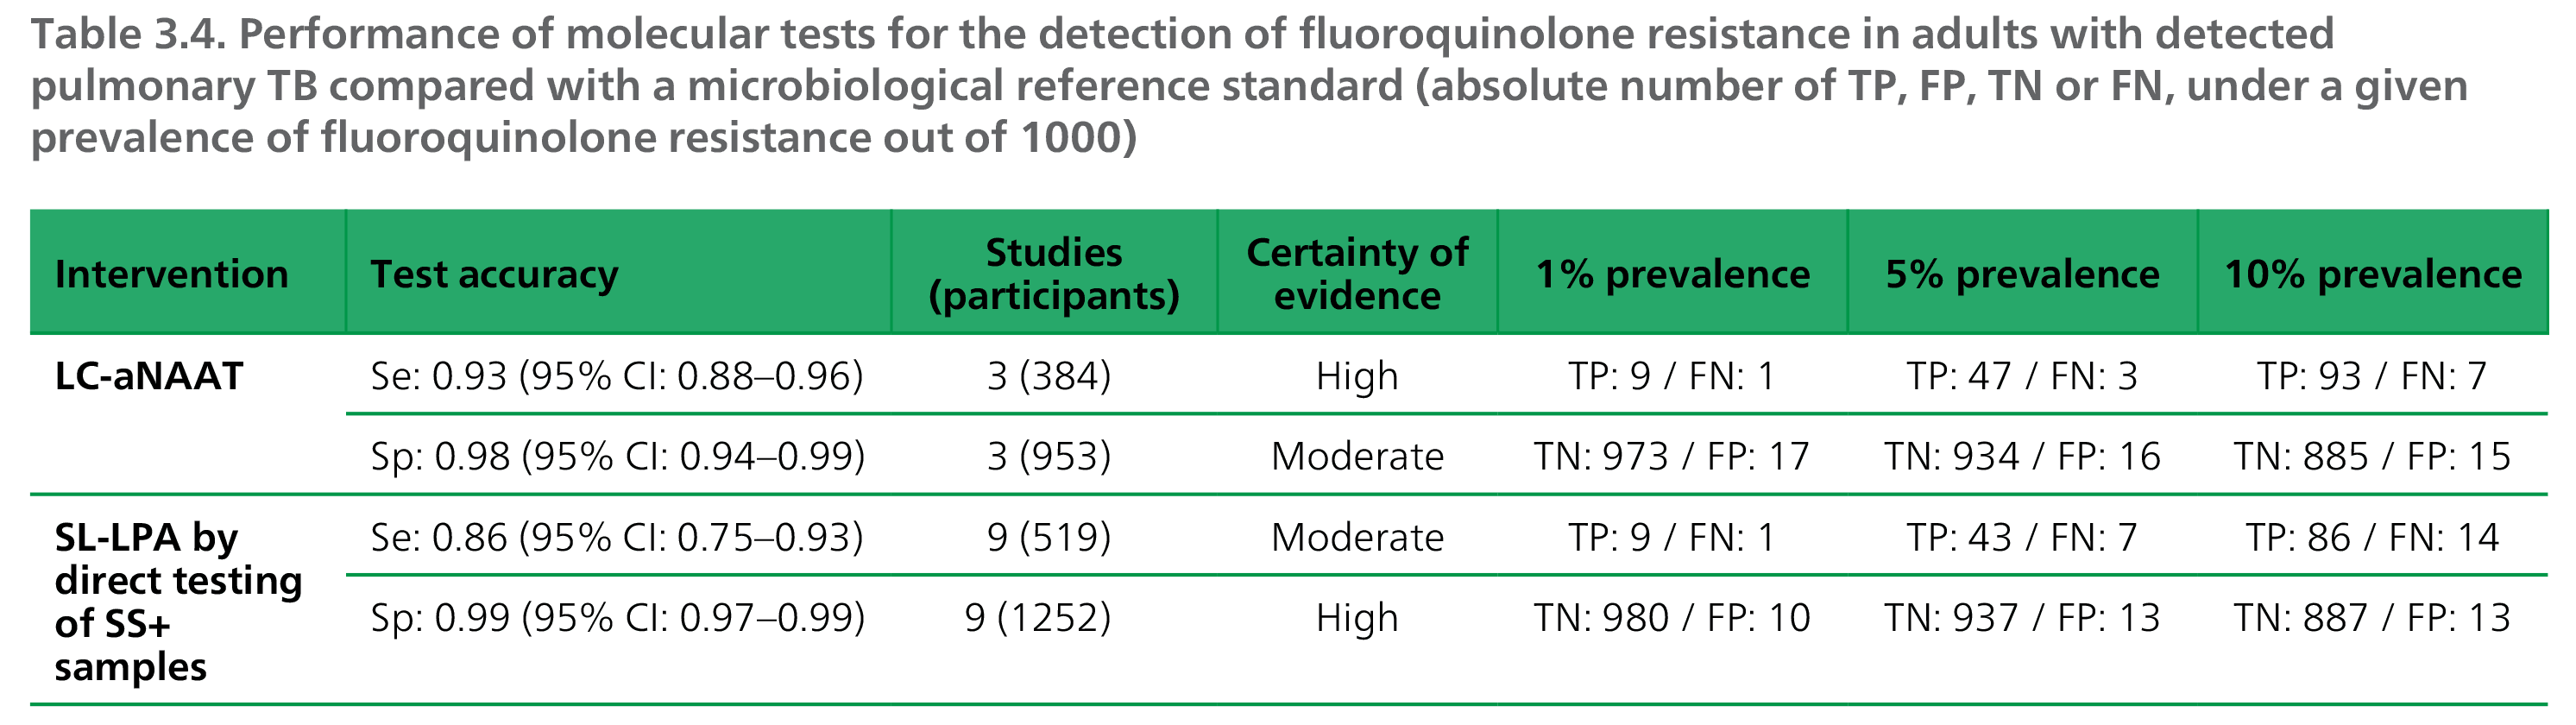 Performance of molecular tests for the detection of fluoroquinolone resistance